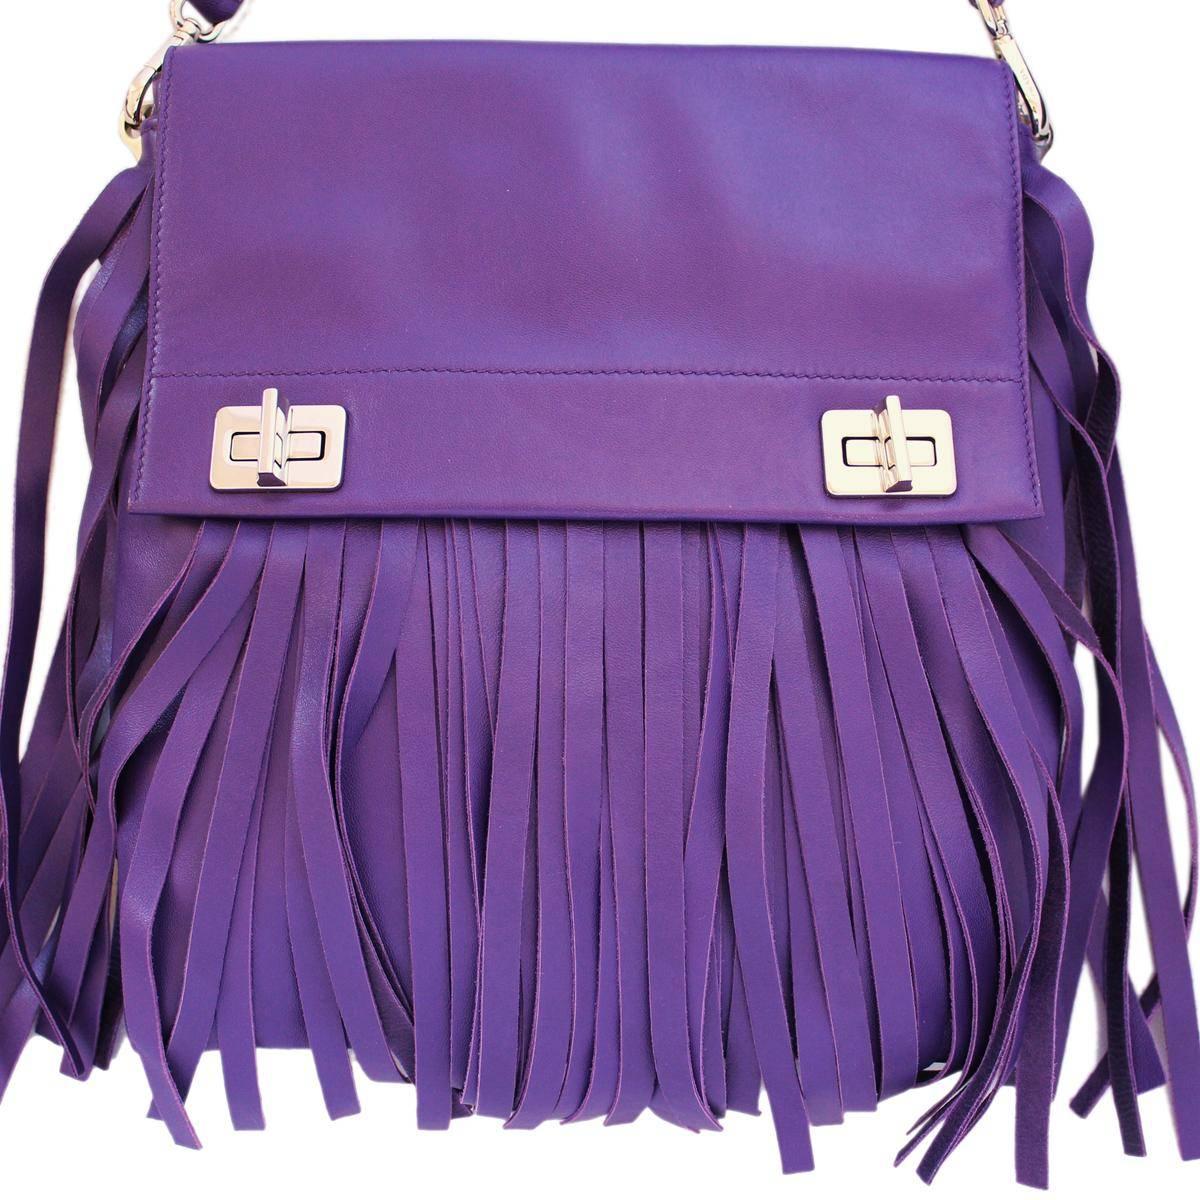 Super chic Prada bag
Nappa
Purple color
With fringes
Removable shoulder strap
Double internal compartment
Internal zip pocket
Internal phone pocket
Cm 22 x 26 x 3 (8.66 x 10.24 x 1.18 inches)
Original price € 1700
Made in Italy
Worldwide express